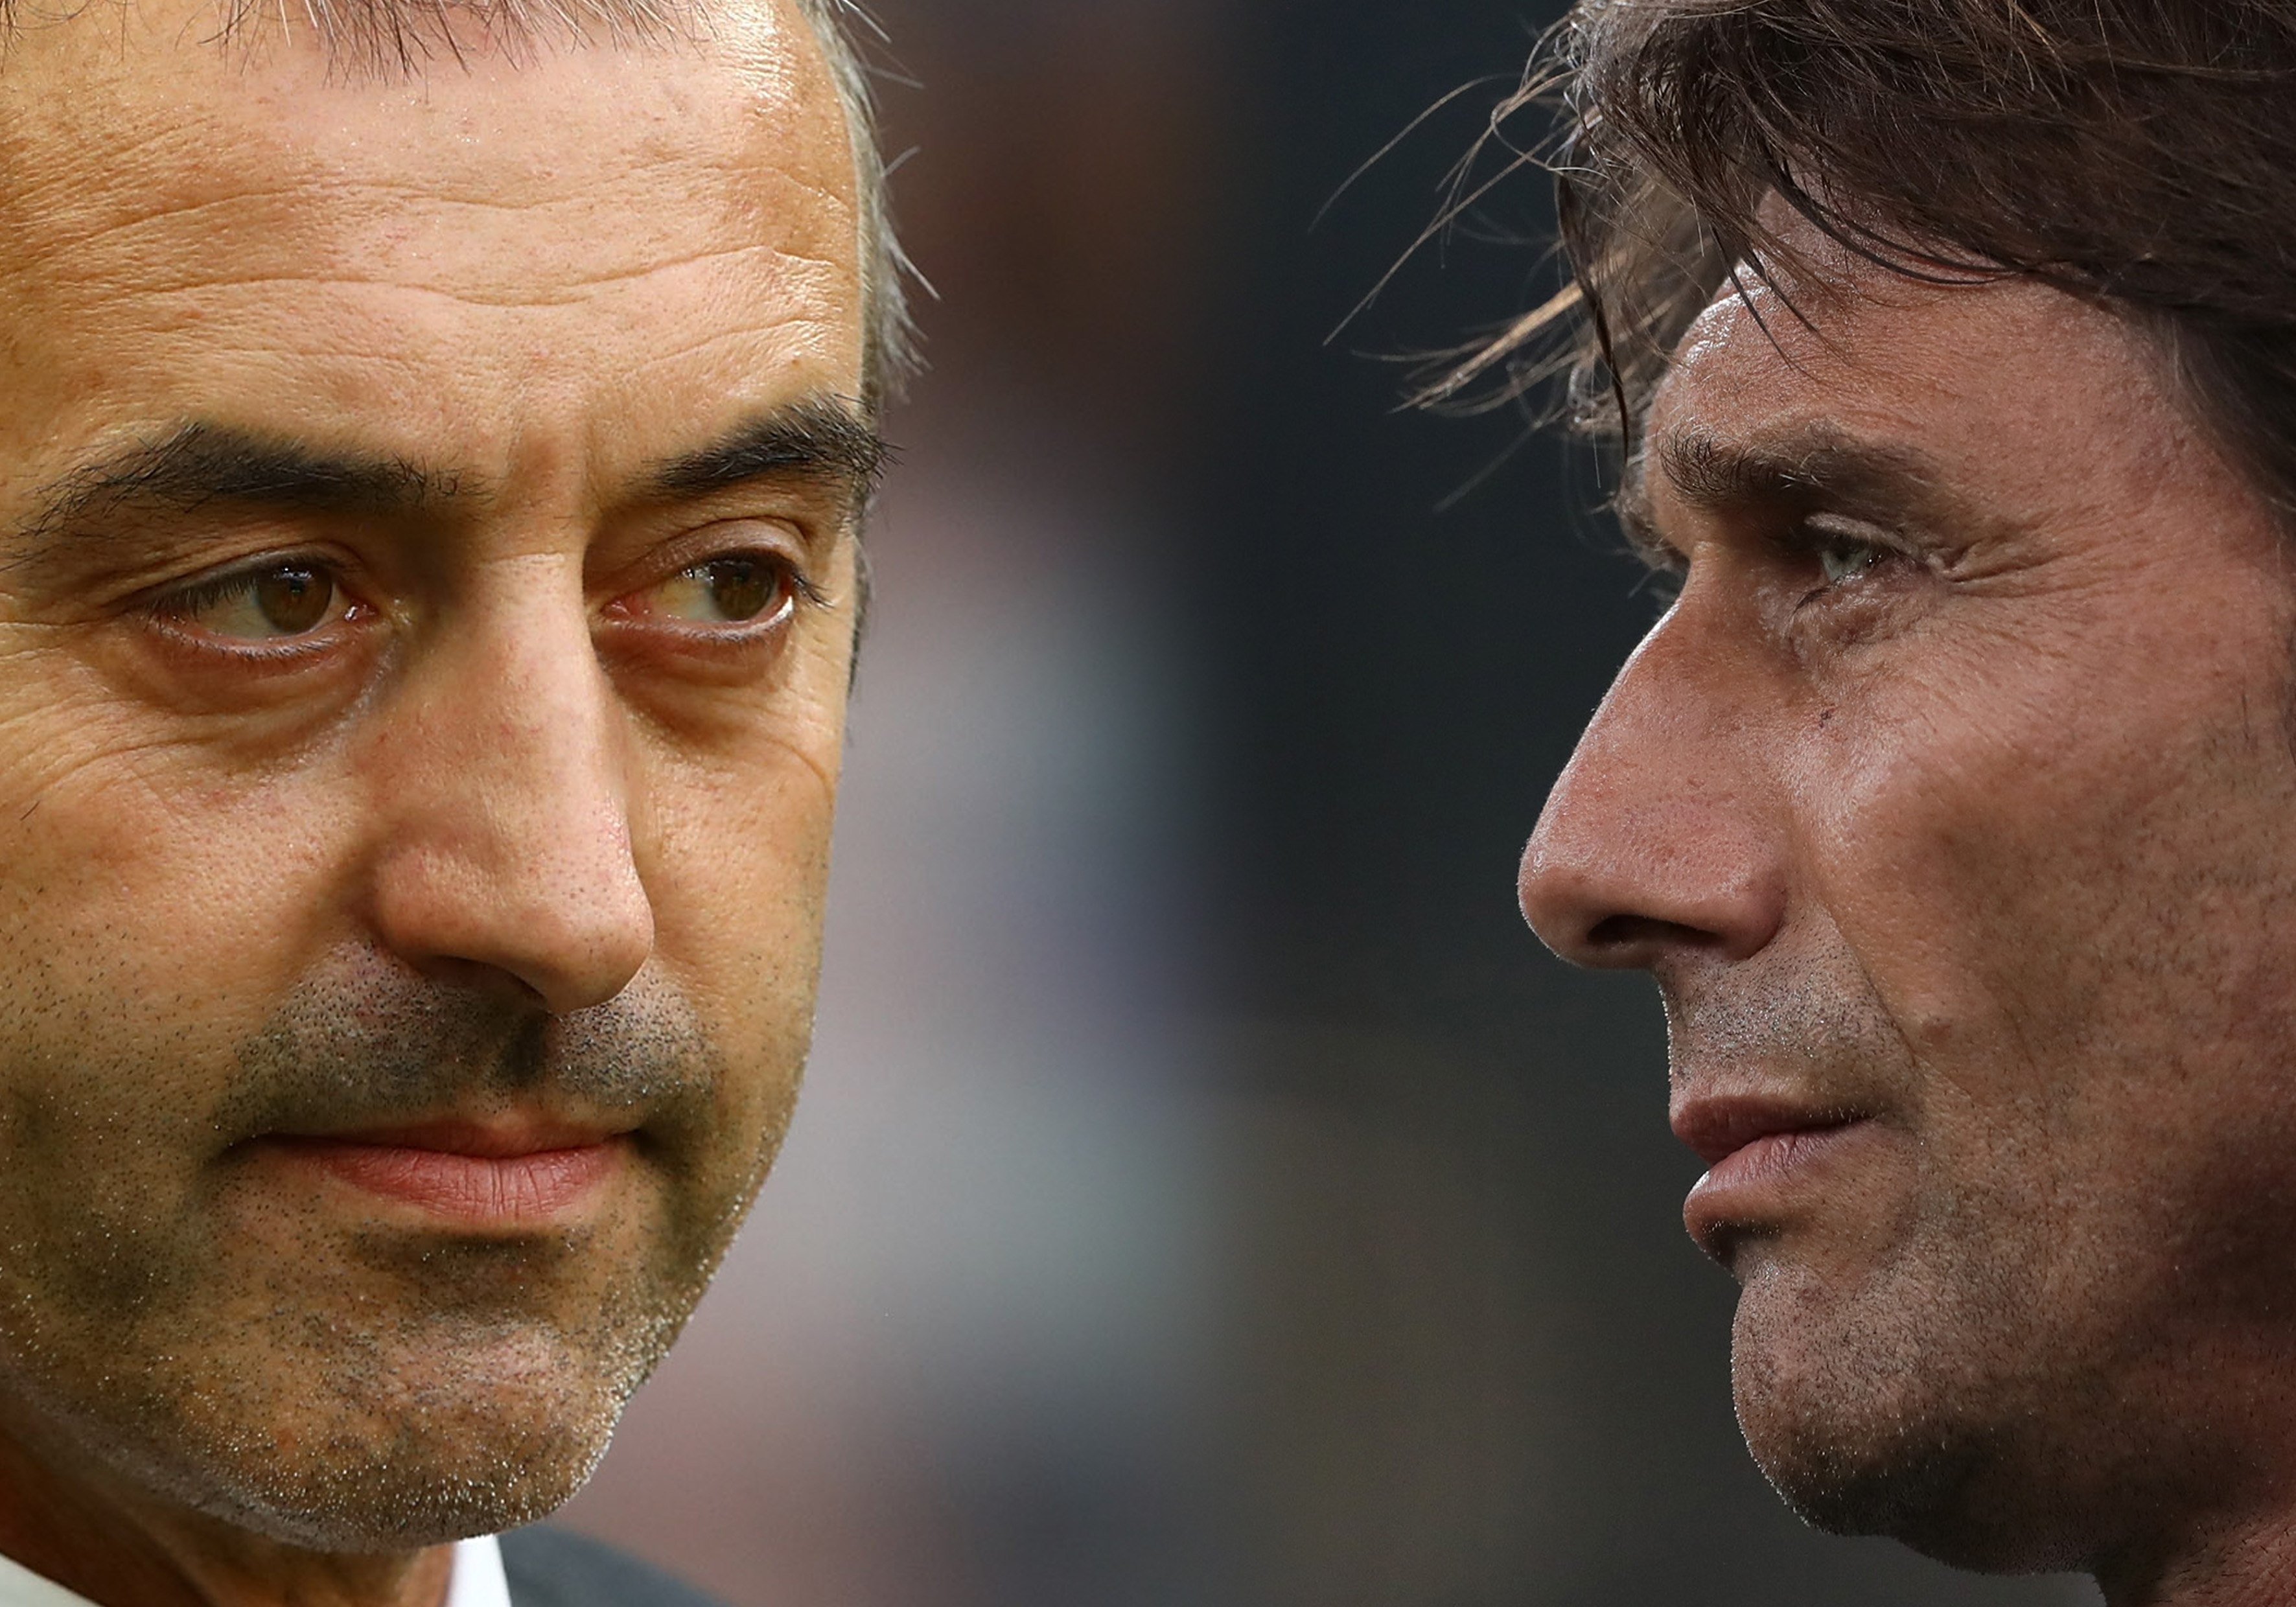 FILE PHOTO (EDITORS NOTE: COMPOSITE OF IMAGES - Image numbers 1171870102,1168235236 - GRADIENT ADDED) In this composite image a comparison has been made between AC Milan coach Marco Giampaolo (L) and FC Internazionale coach Antonio Conte.  AC Milan and  FC Internazionale meet in the "Milan Derby"  at the San Siro Stadium on September 21, 2019 in Milan,Italy.   ***LEFT IMAGE***  MILAN, ITALY - AUGUST 31: AC Milan coach Marco Giampaolo looks on before the Serie A match between AC Milan and Brescia Calcio at Stadio Giuseppe Meazza on September 1, 2019 in Milan, Italy. (Photo by Marco Luzzani/Getty Images) ***RIGHT IMAGE***  MILAN, ITALY - SEPTEMBER 14: FC Internazionale coach Antonio Conte looks on during the Serie A match between FC Internazionale and Udinese Calcio at Stadio Giuseppe Meazza on September 14, 2019 in Milan, Italy. (Photo by Emilio Andreoli/Getty Images)